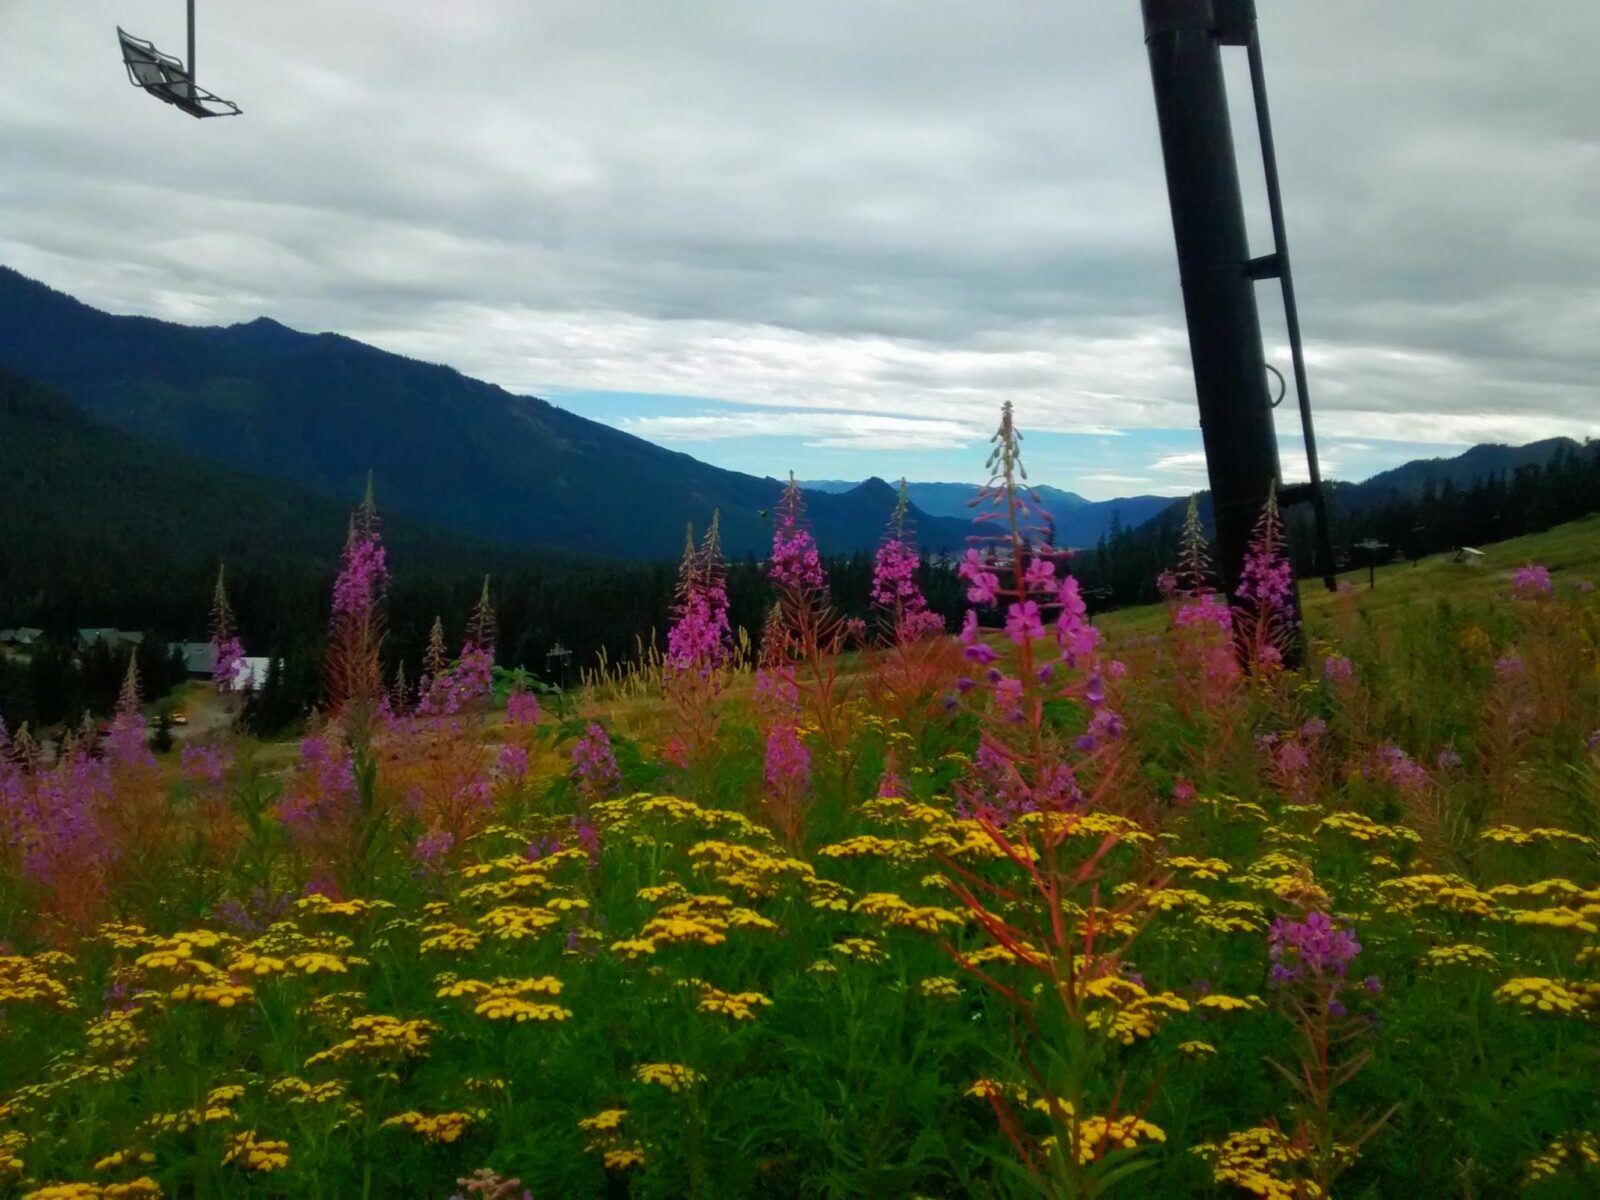 Yellow and purple wildflowers line the Lodge Lake trail under the chair lifts used for skiing in the winter.